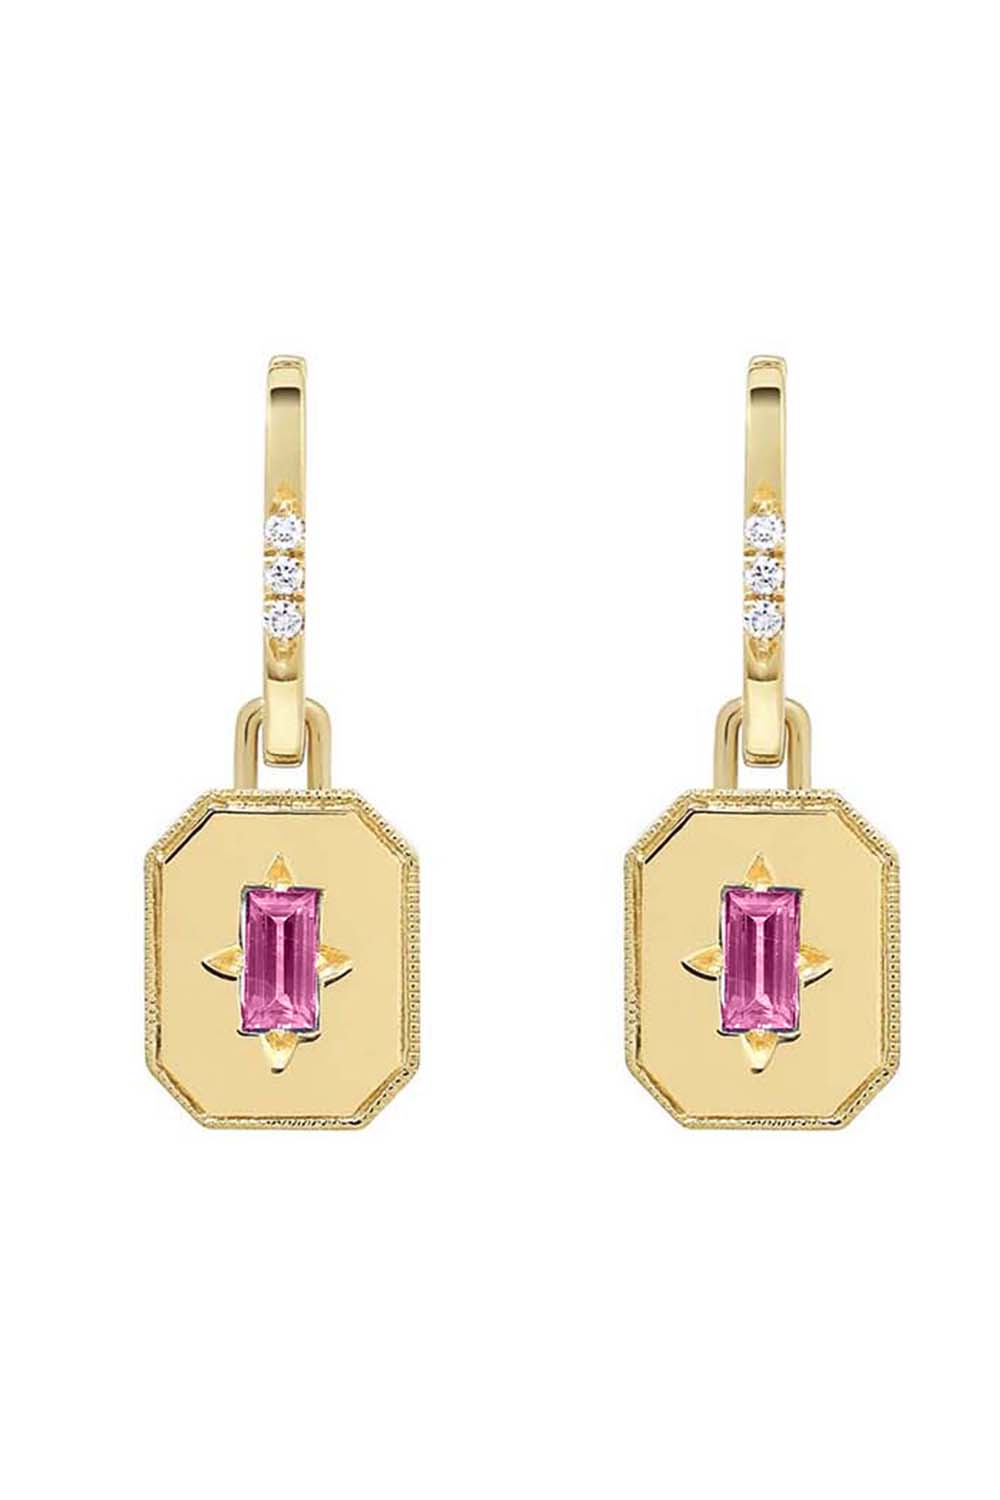 STATE PROPERTY-Minor Pink Sapphire Spade Pendant Drop Earrings-YELLOW GOLD